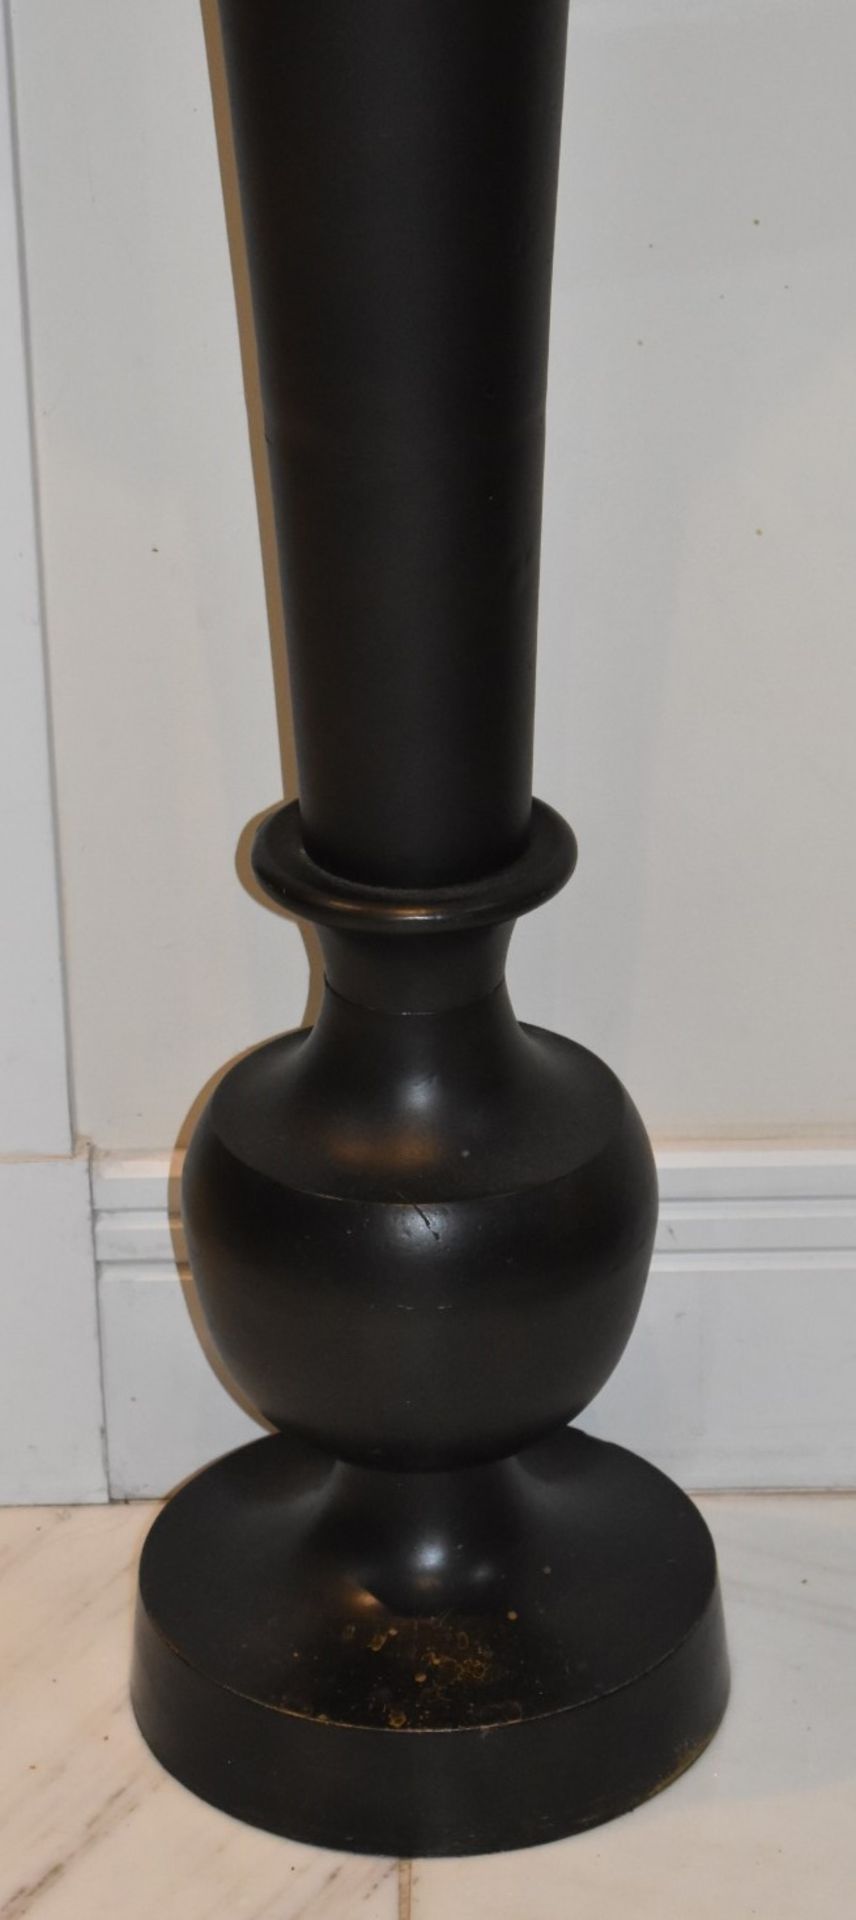 Pair of Tall Trumpet Style Vases - Approx 5.5ft Tall - Metal Vases Finished in Black With Artificial - Image 5 of 8